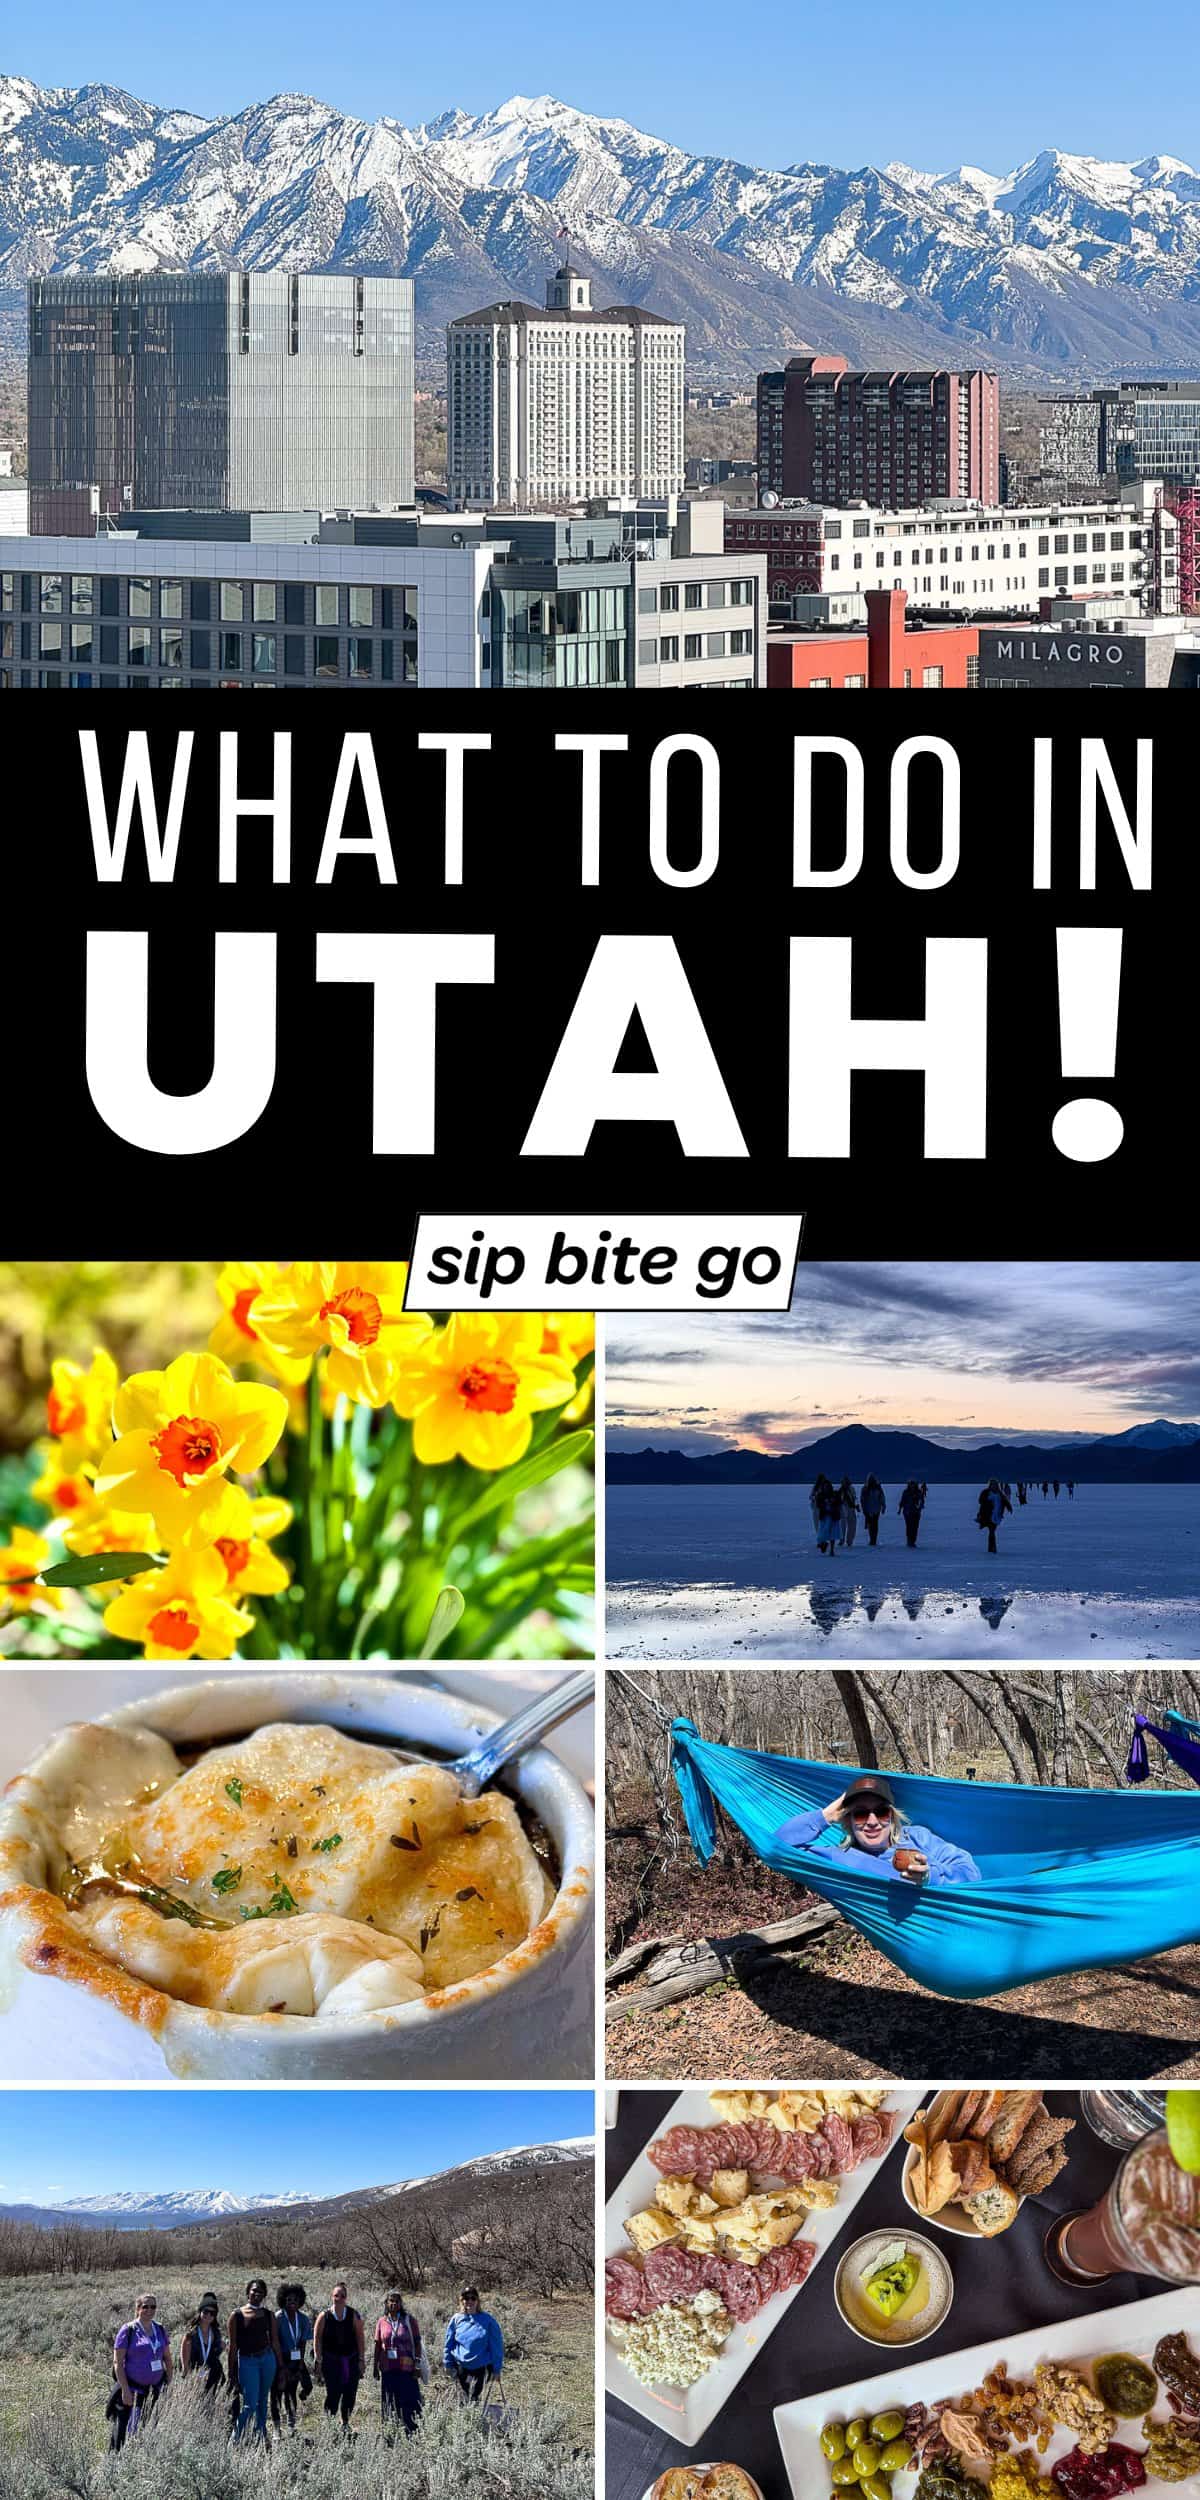 Fun things to do in Utah with collage of attractions and food